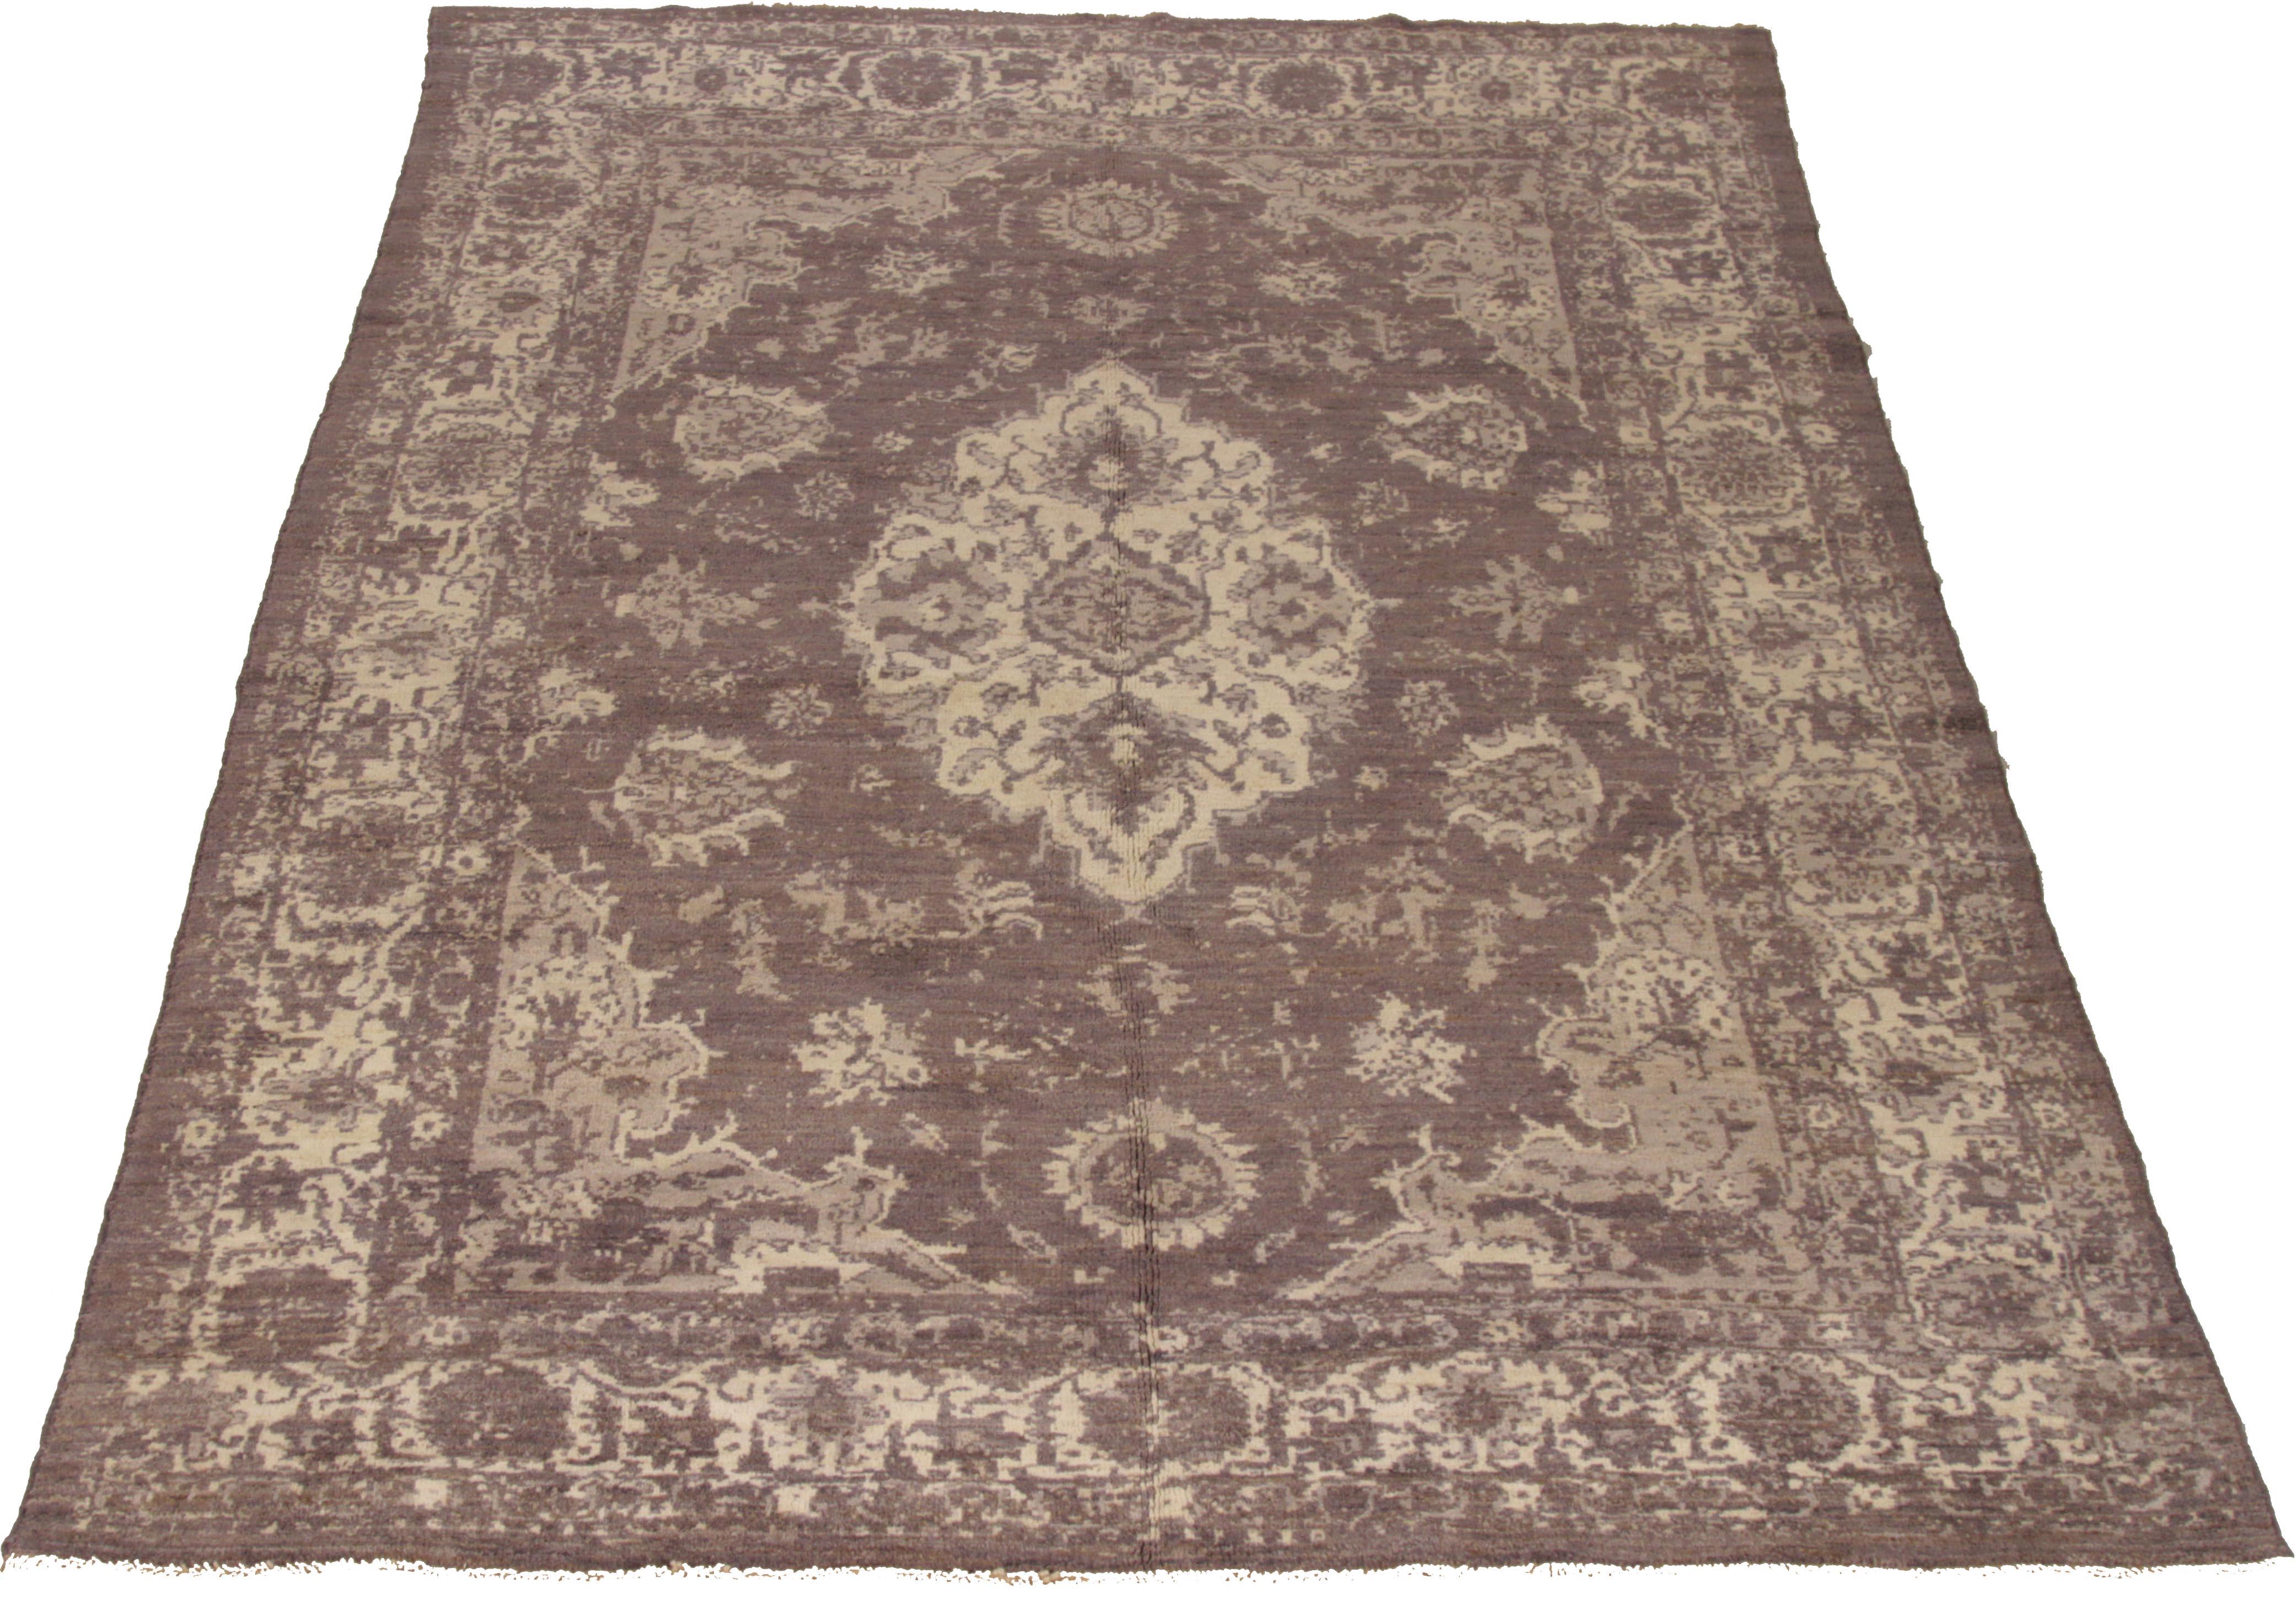 A new production Persian rug handwoven from the finest sheep’s wool and colored with all-natural vegetable dyes that are safe for humans and pets. It’s a traditional Oushak design featuring a brown field with a large floral medallion in ivory. It’s